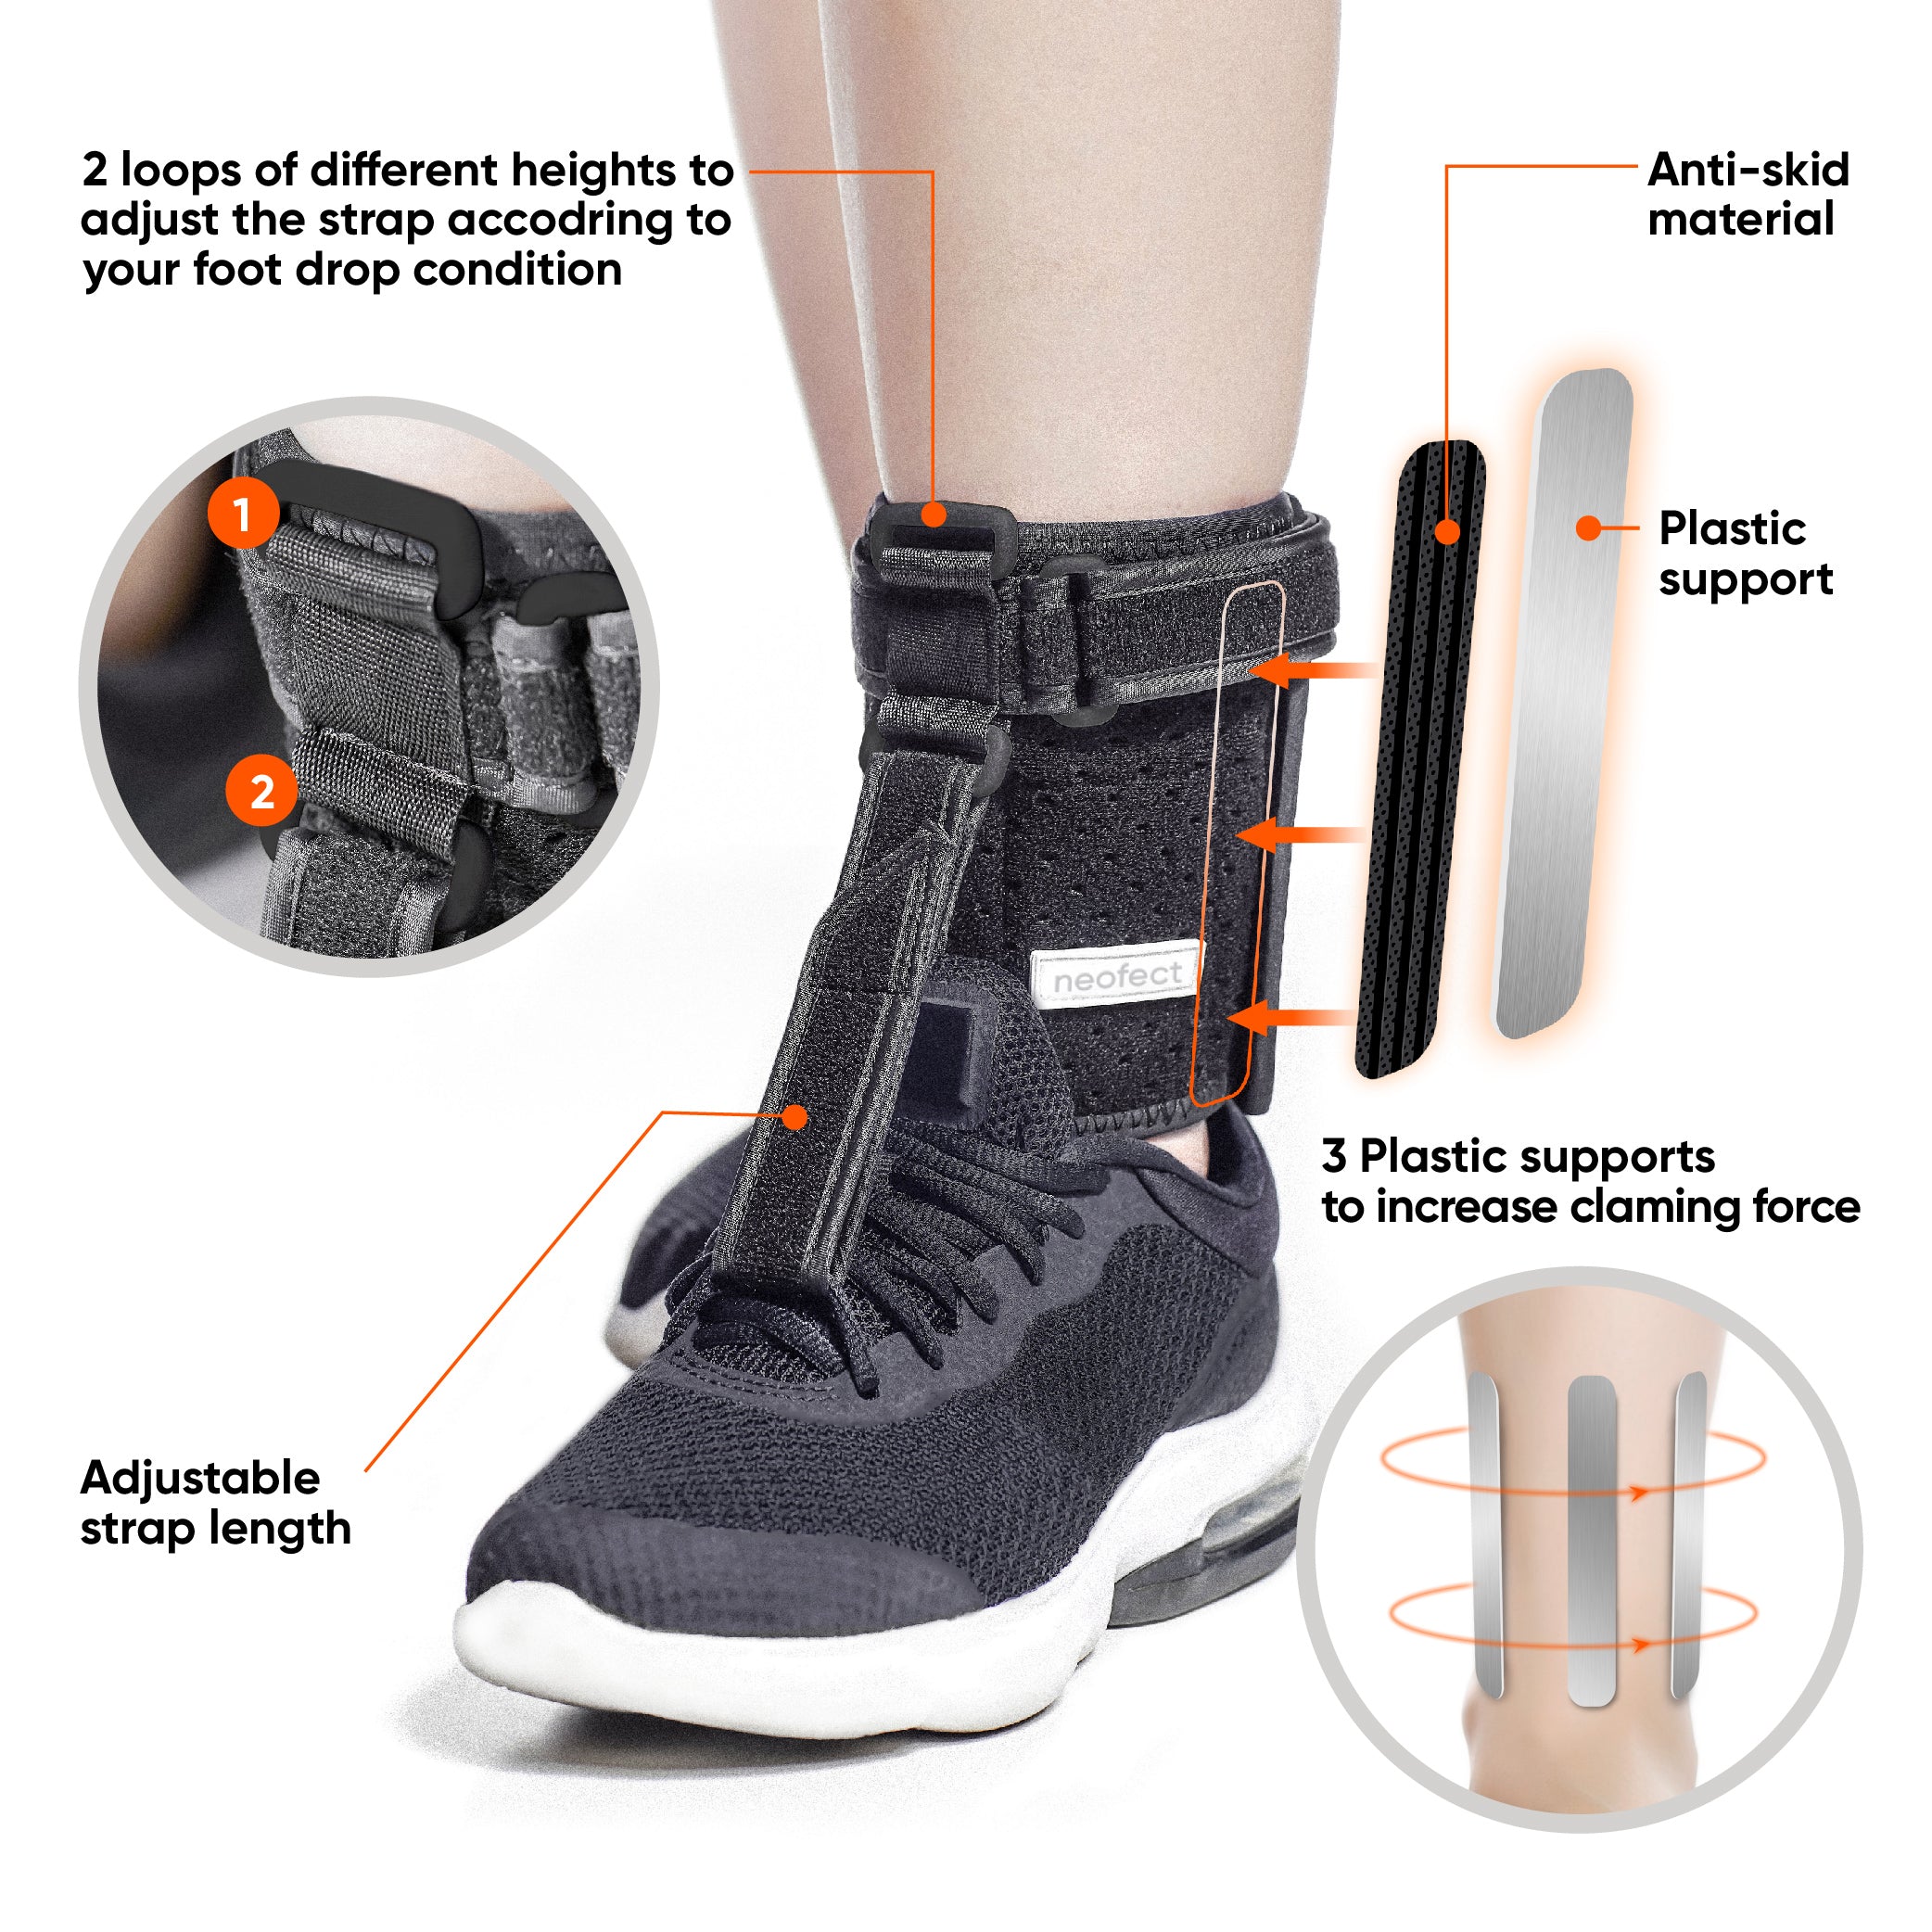 AFO Brace for Foot Drop: How to Find the Perfect Fit? - NewGait